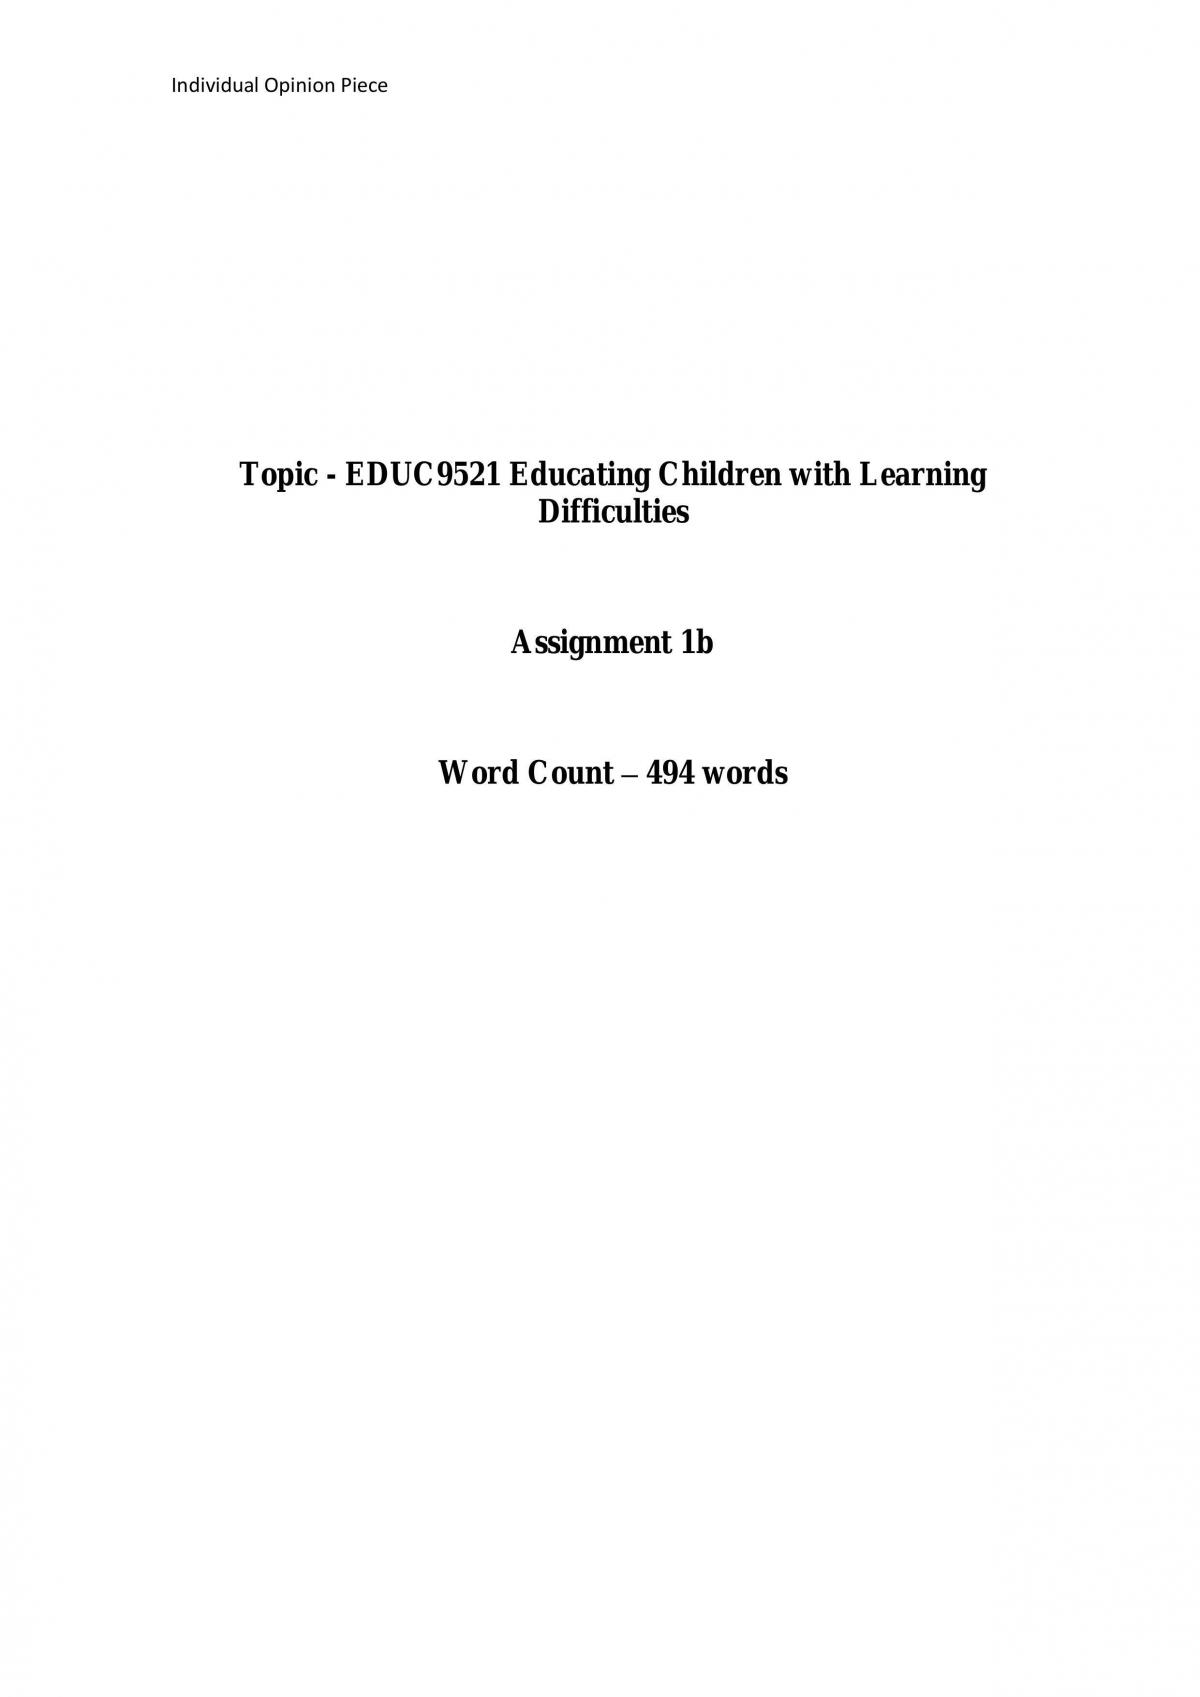 thesis about learning difficulties